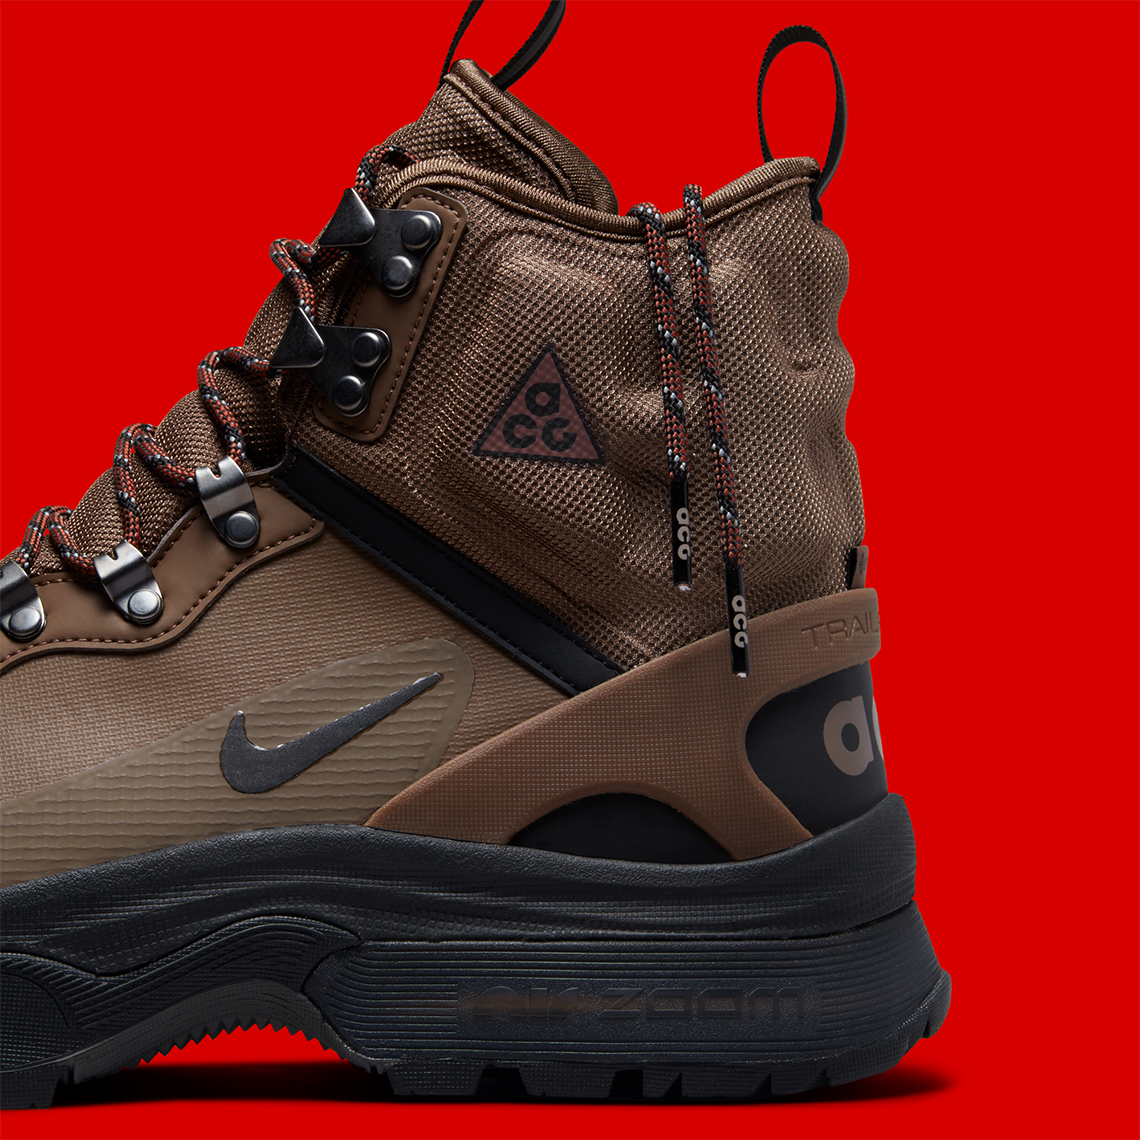 After Winter Olympics Debut, The Nike ACG Zoom Gaiadome Will Release At